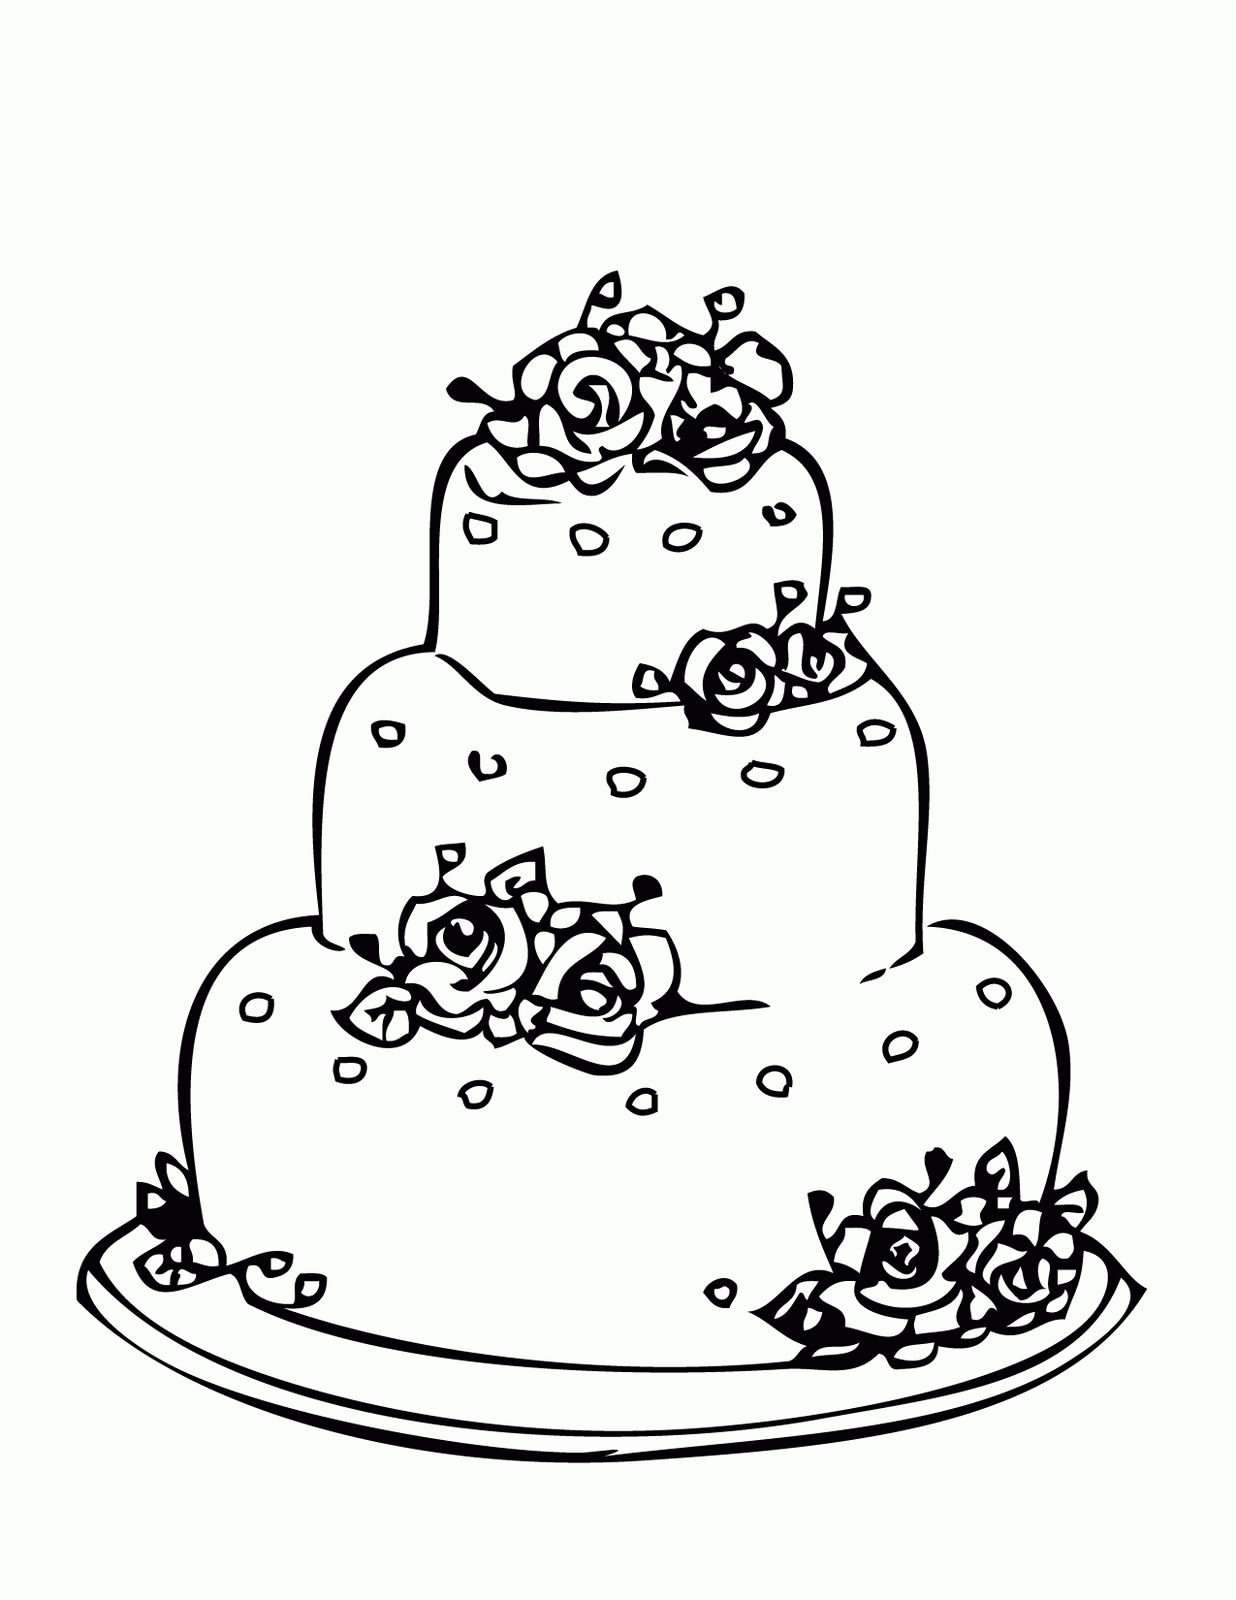 Lovely Cake Coloring Pages #7044 Cake Coloring Pages ~ Coloring Tone